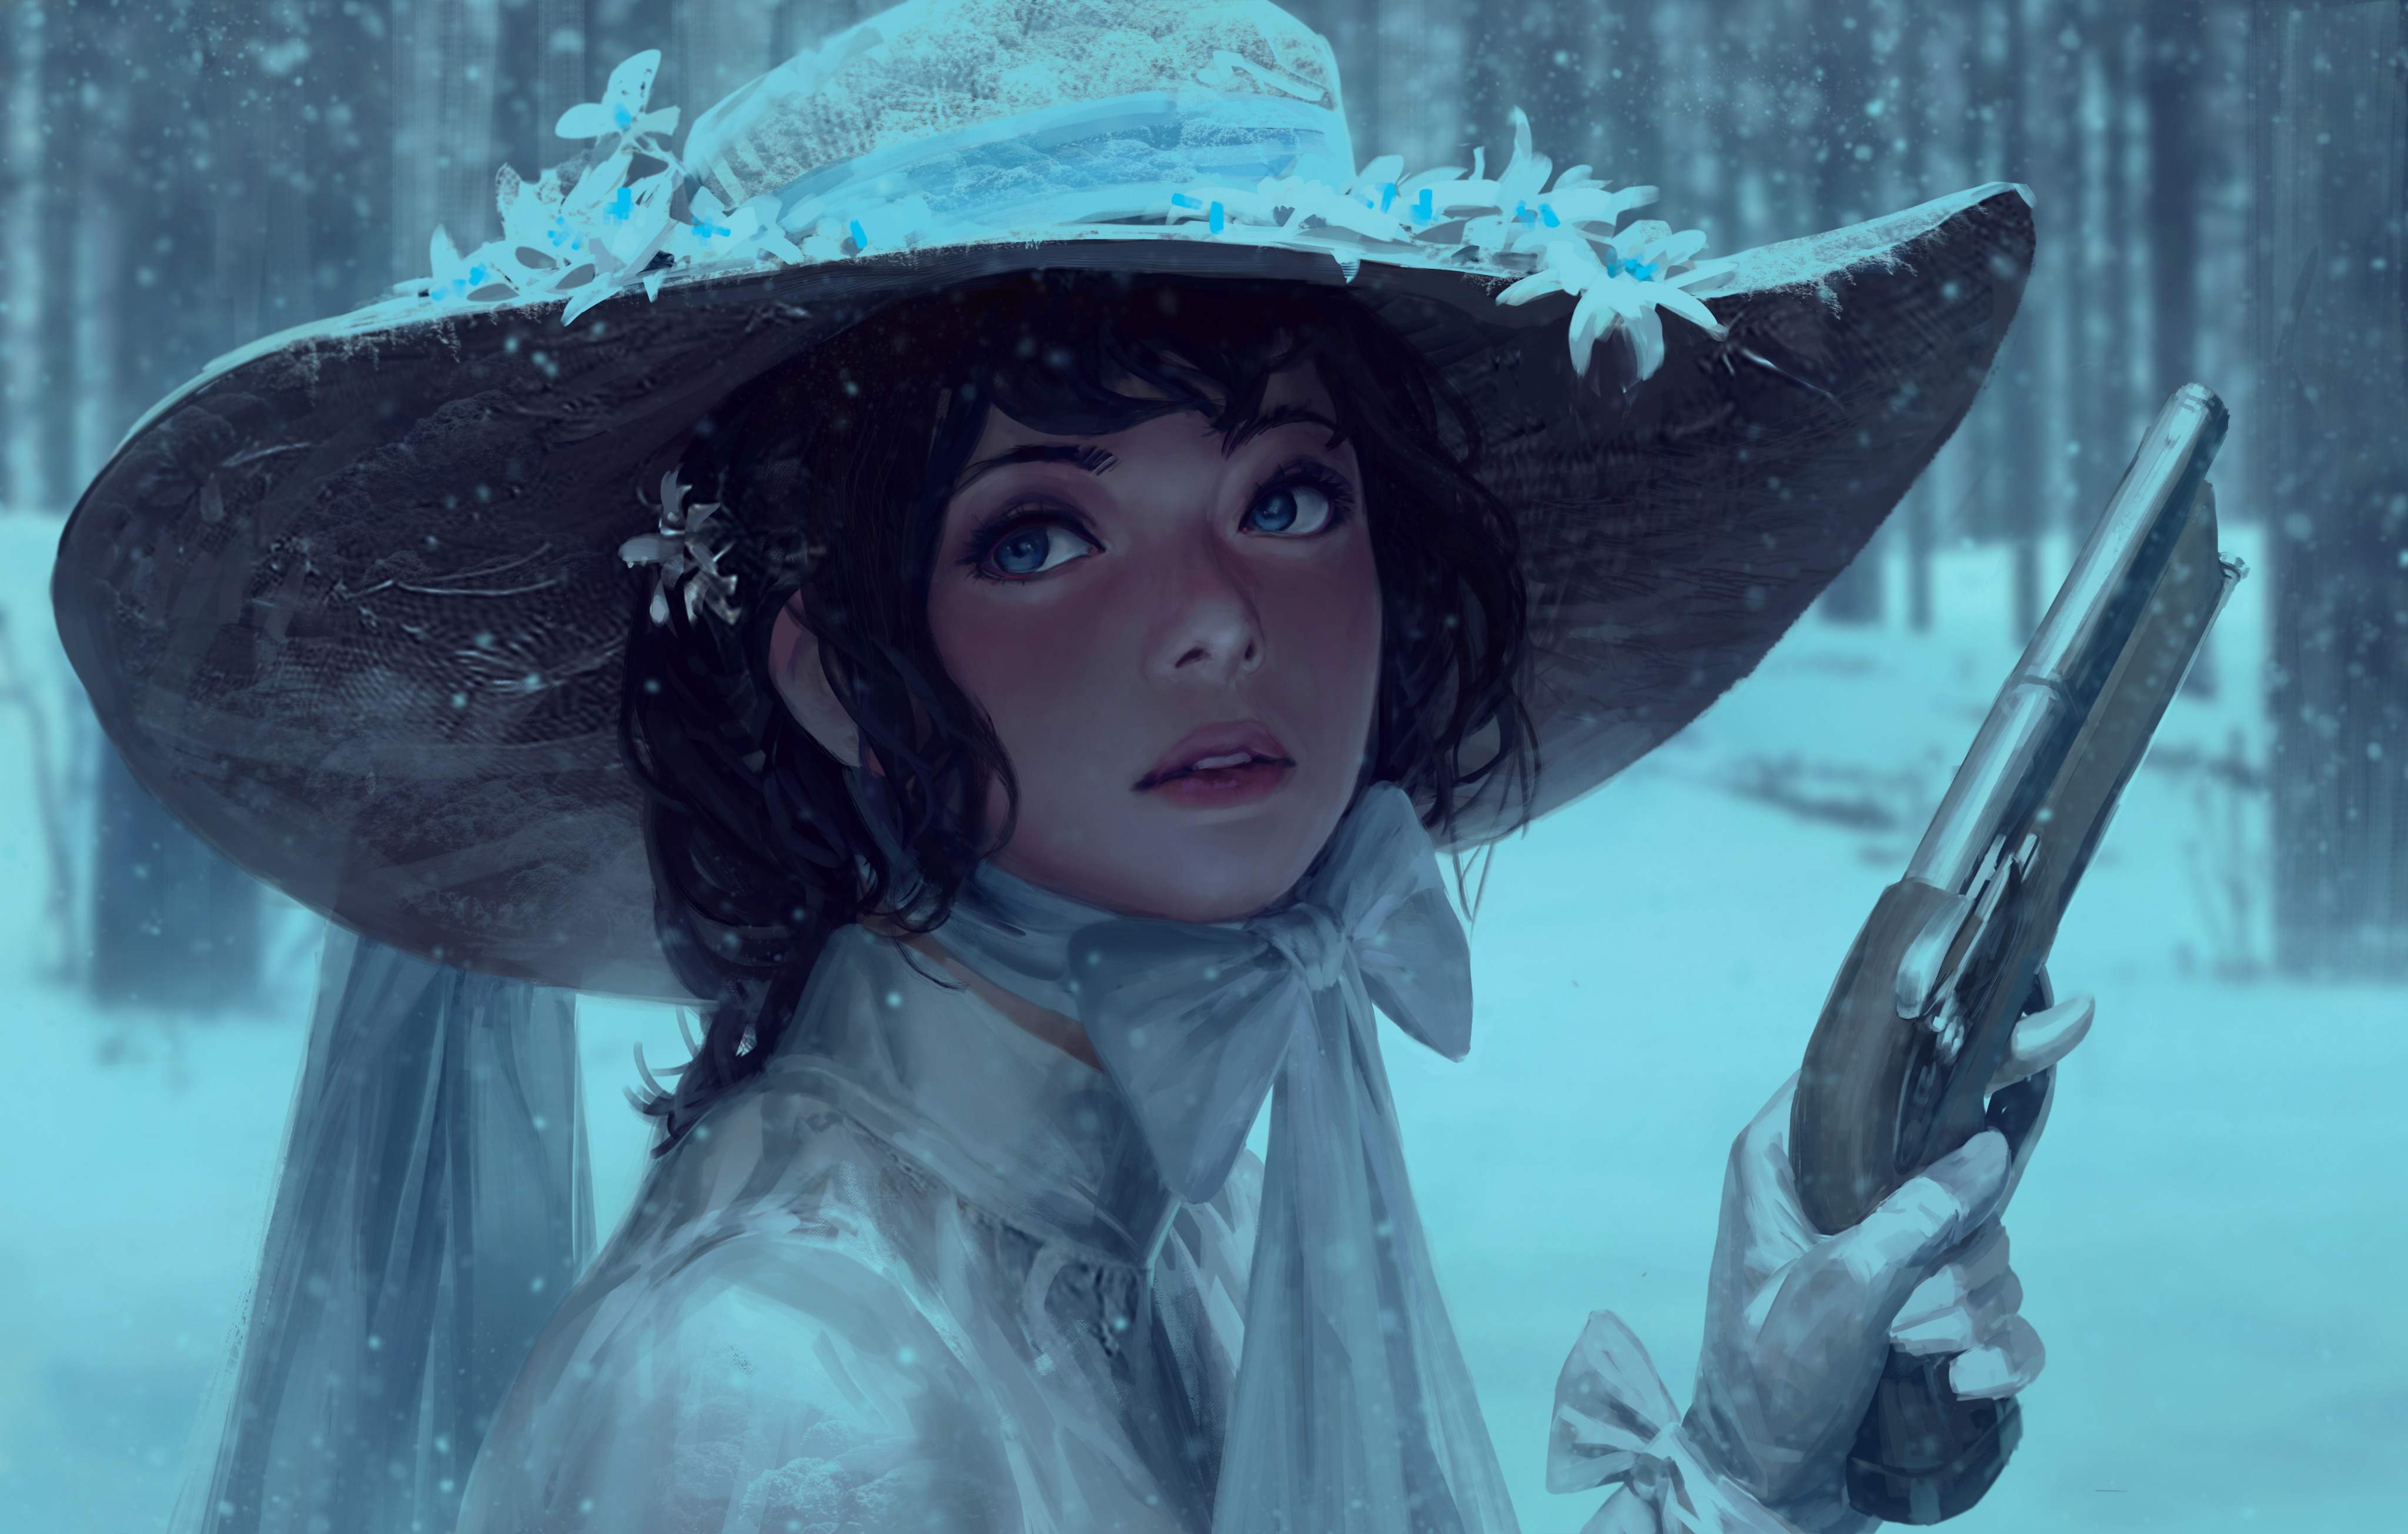 General 4096x2609 white clothing gun weapon gloves looking away forest trees snowing snow winter original characters artwork drawing digital art fantasy girl parted lips face women portrait GUWEIZ